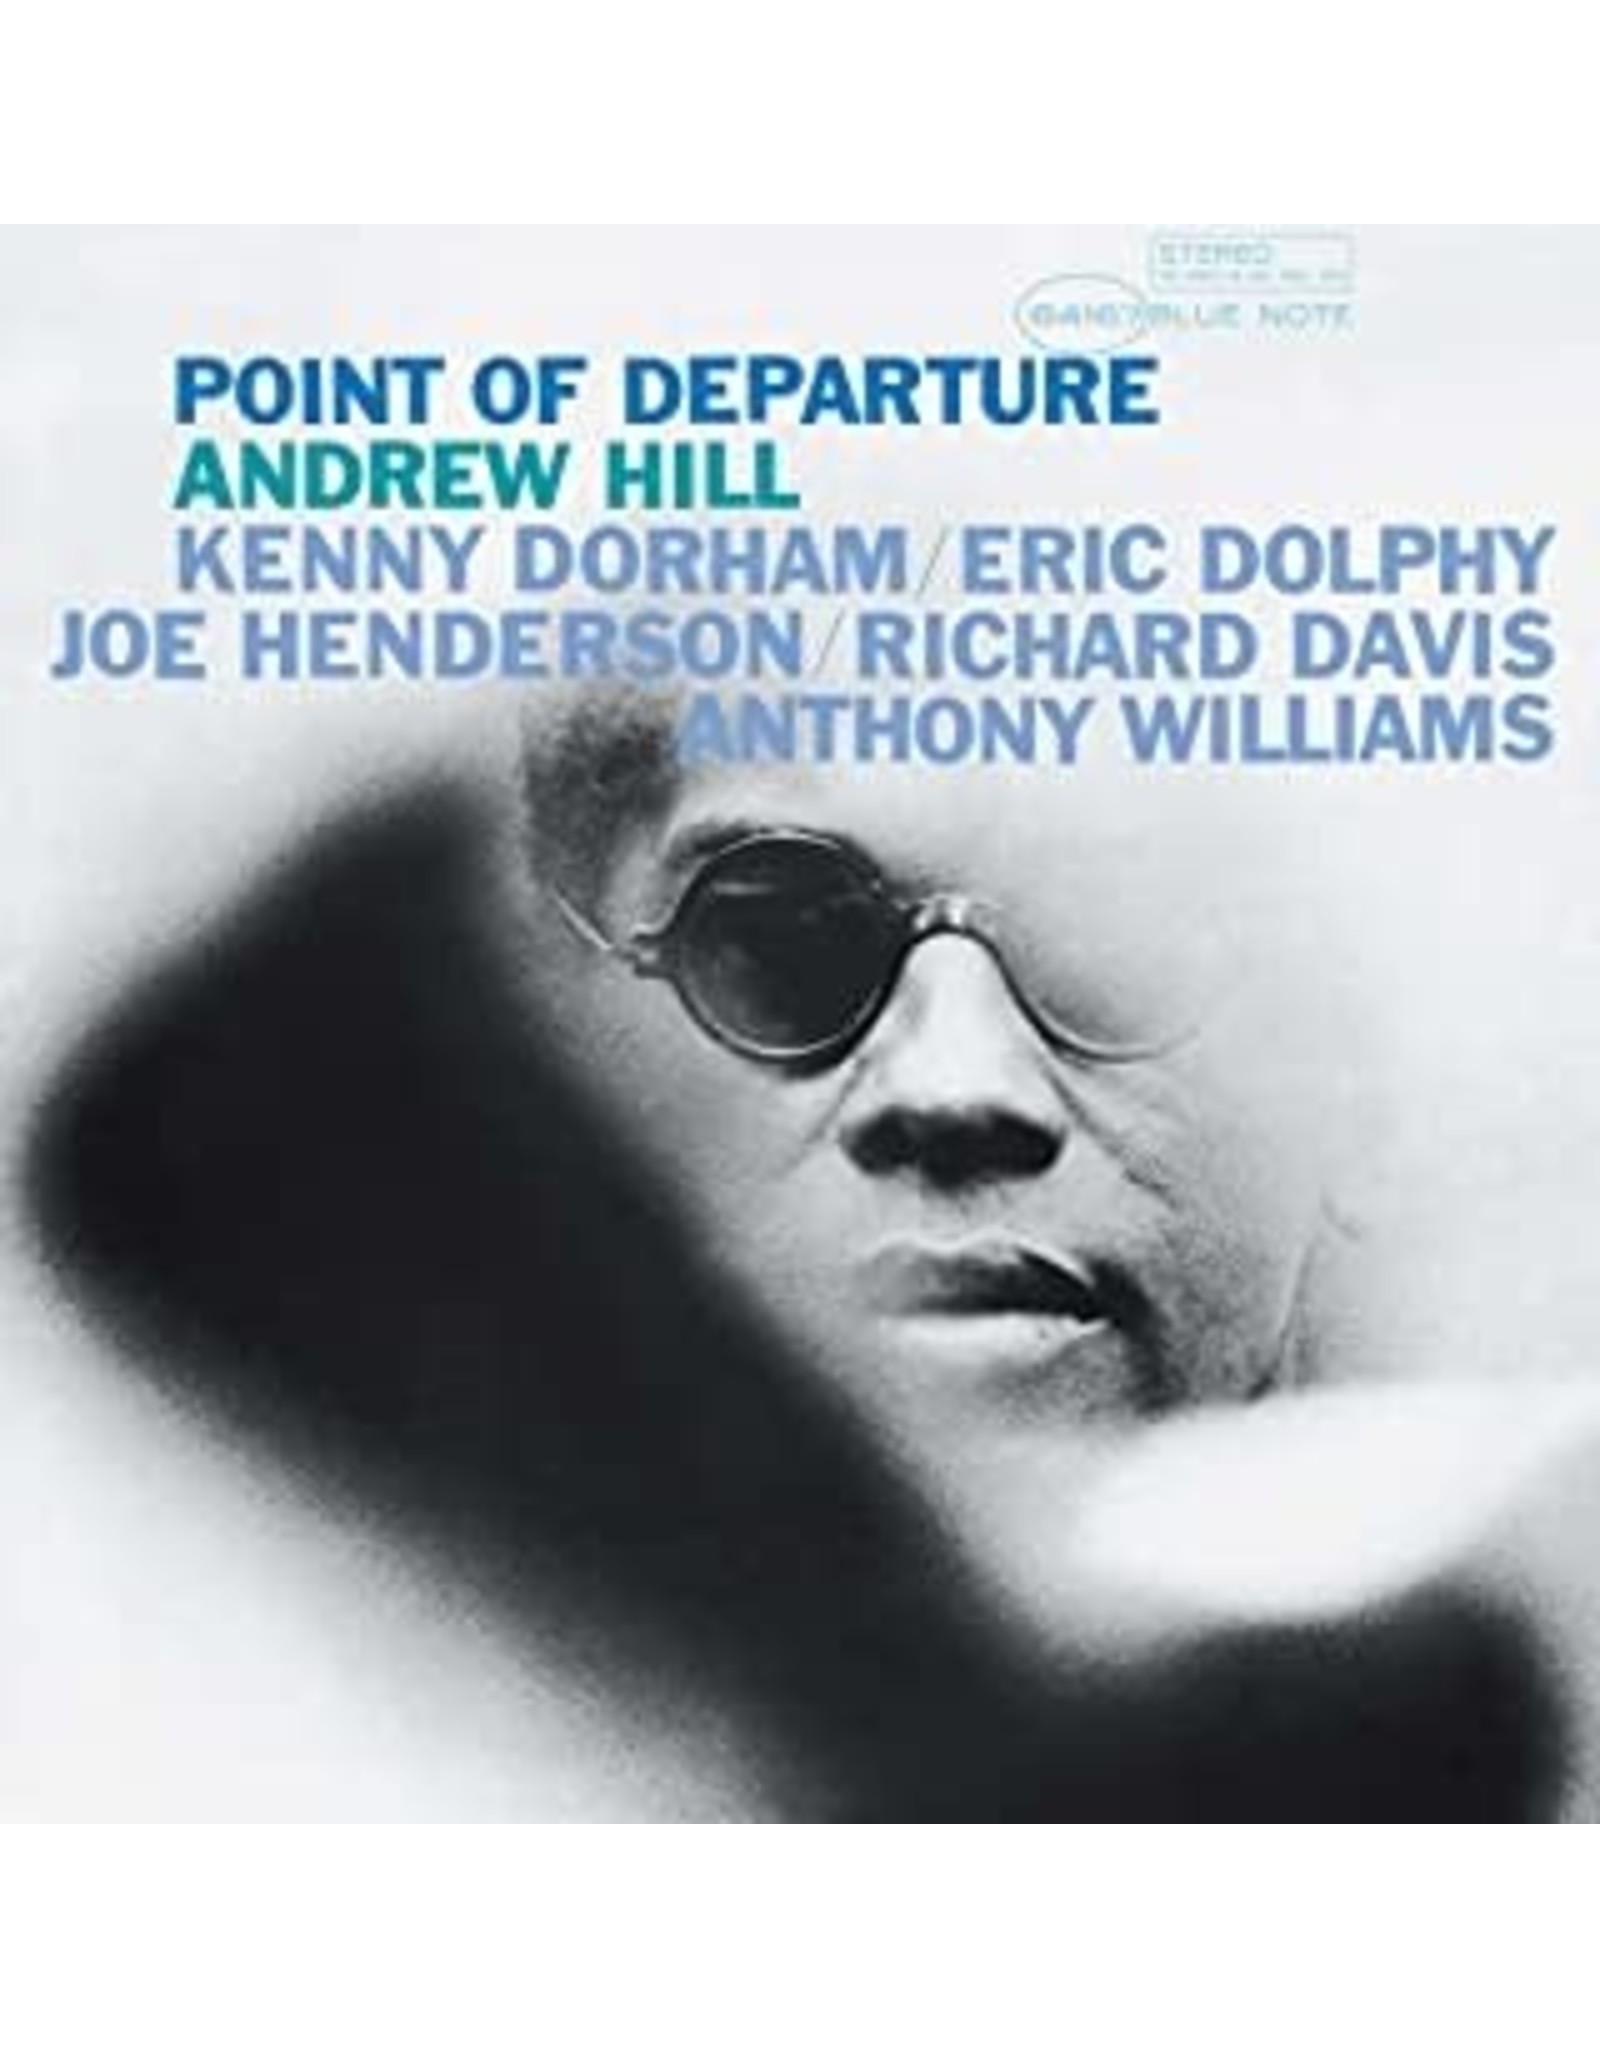 Hill, Andrew - Point Of Departure LP